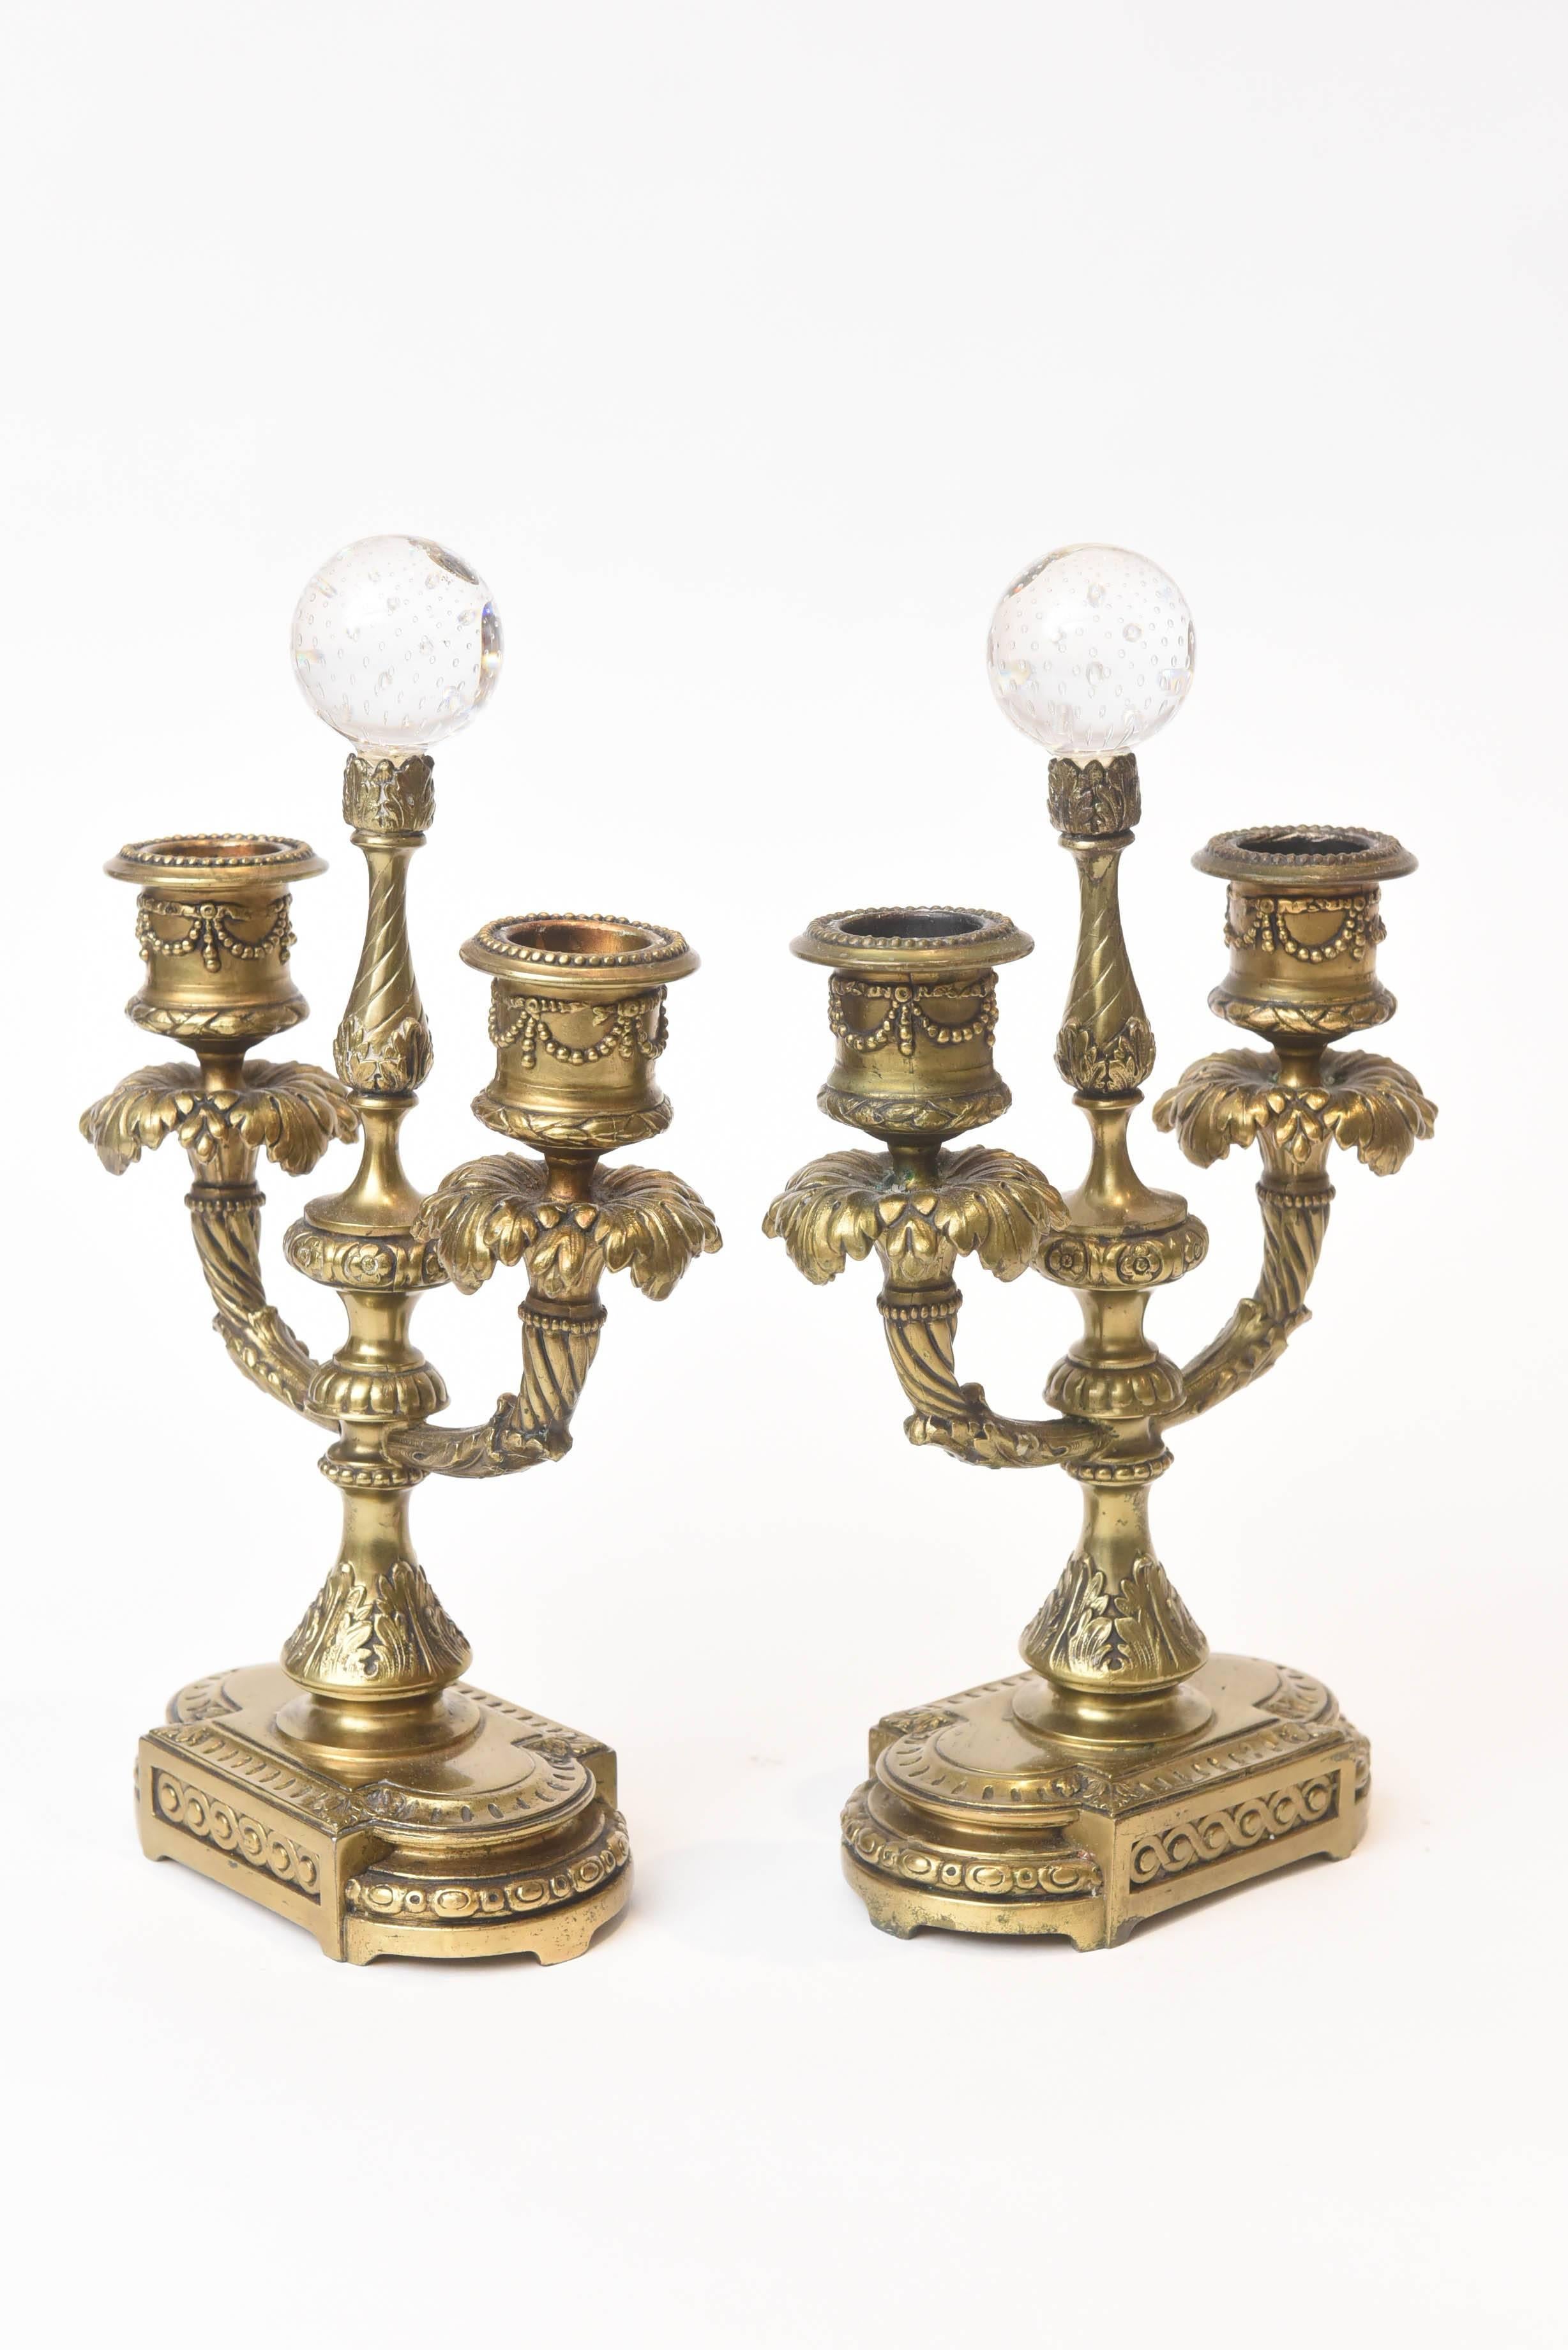 American Elaborate Gilt Metal And Crystal Three-Piece Table Top Centerpiece Set